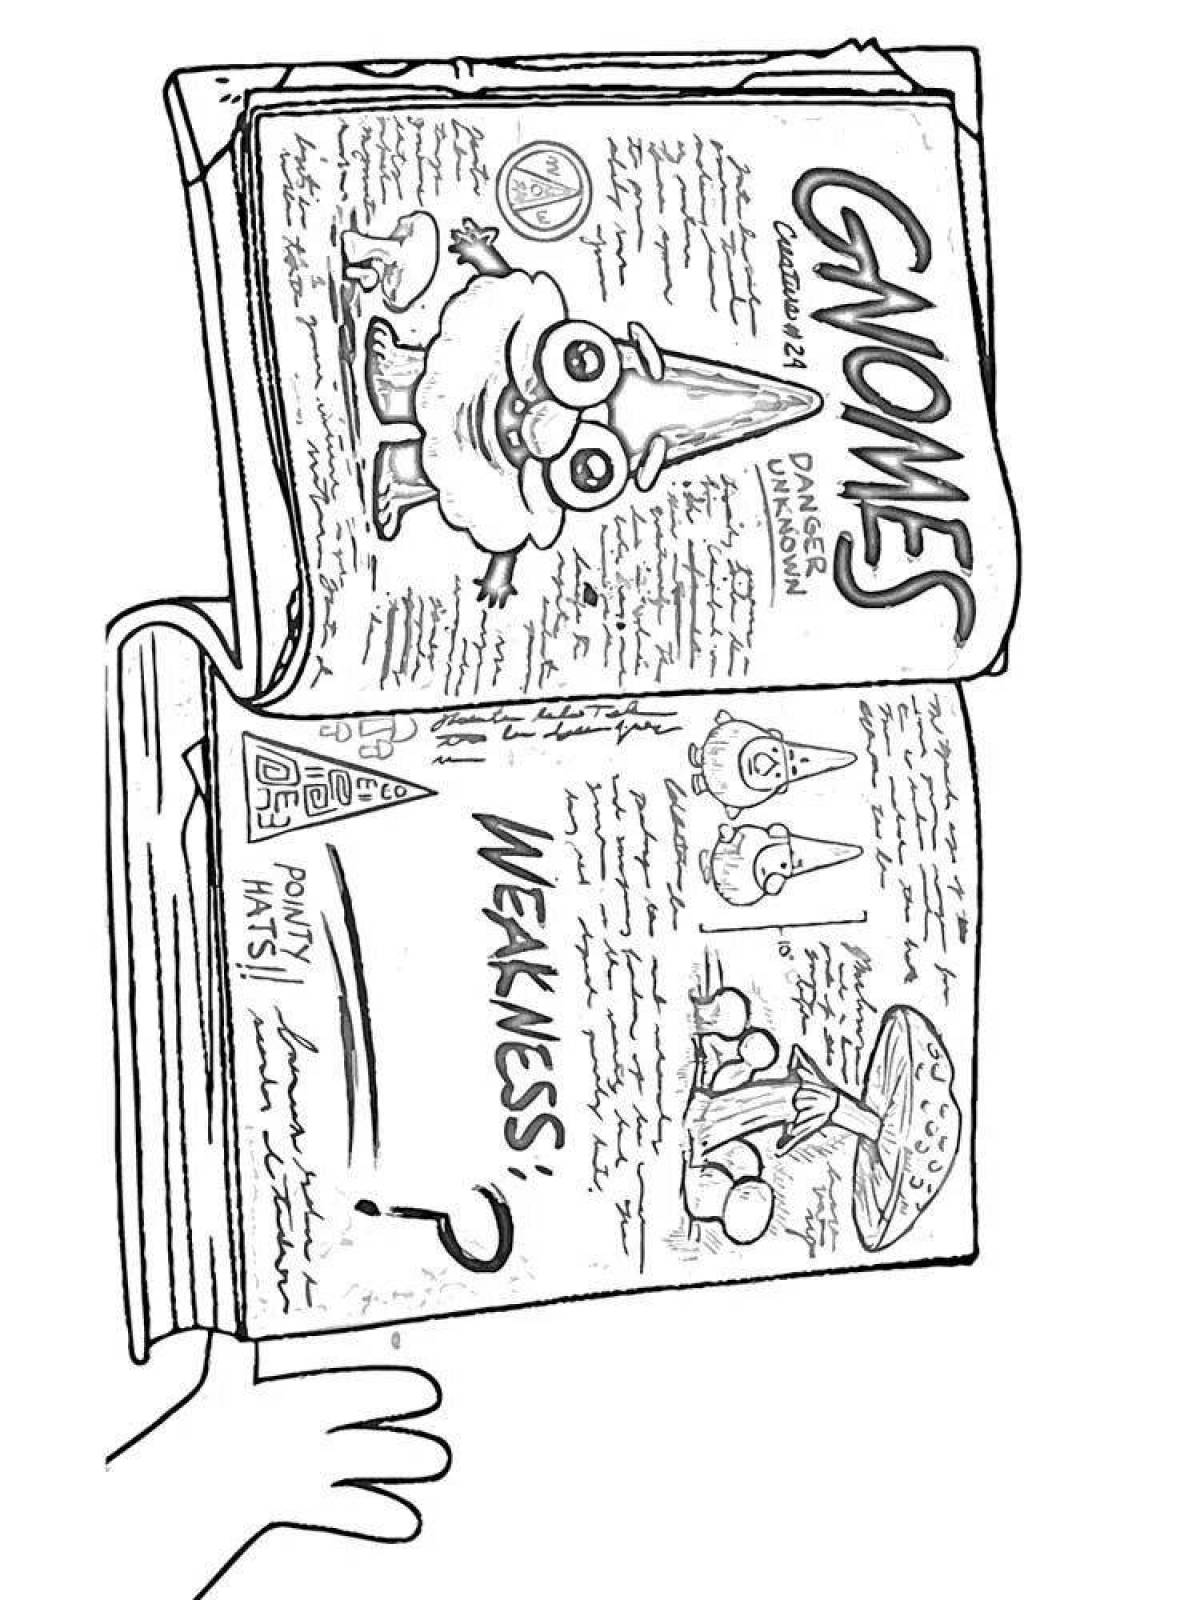 Gravity falls diary coloring page